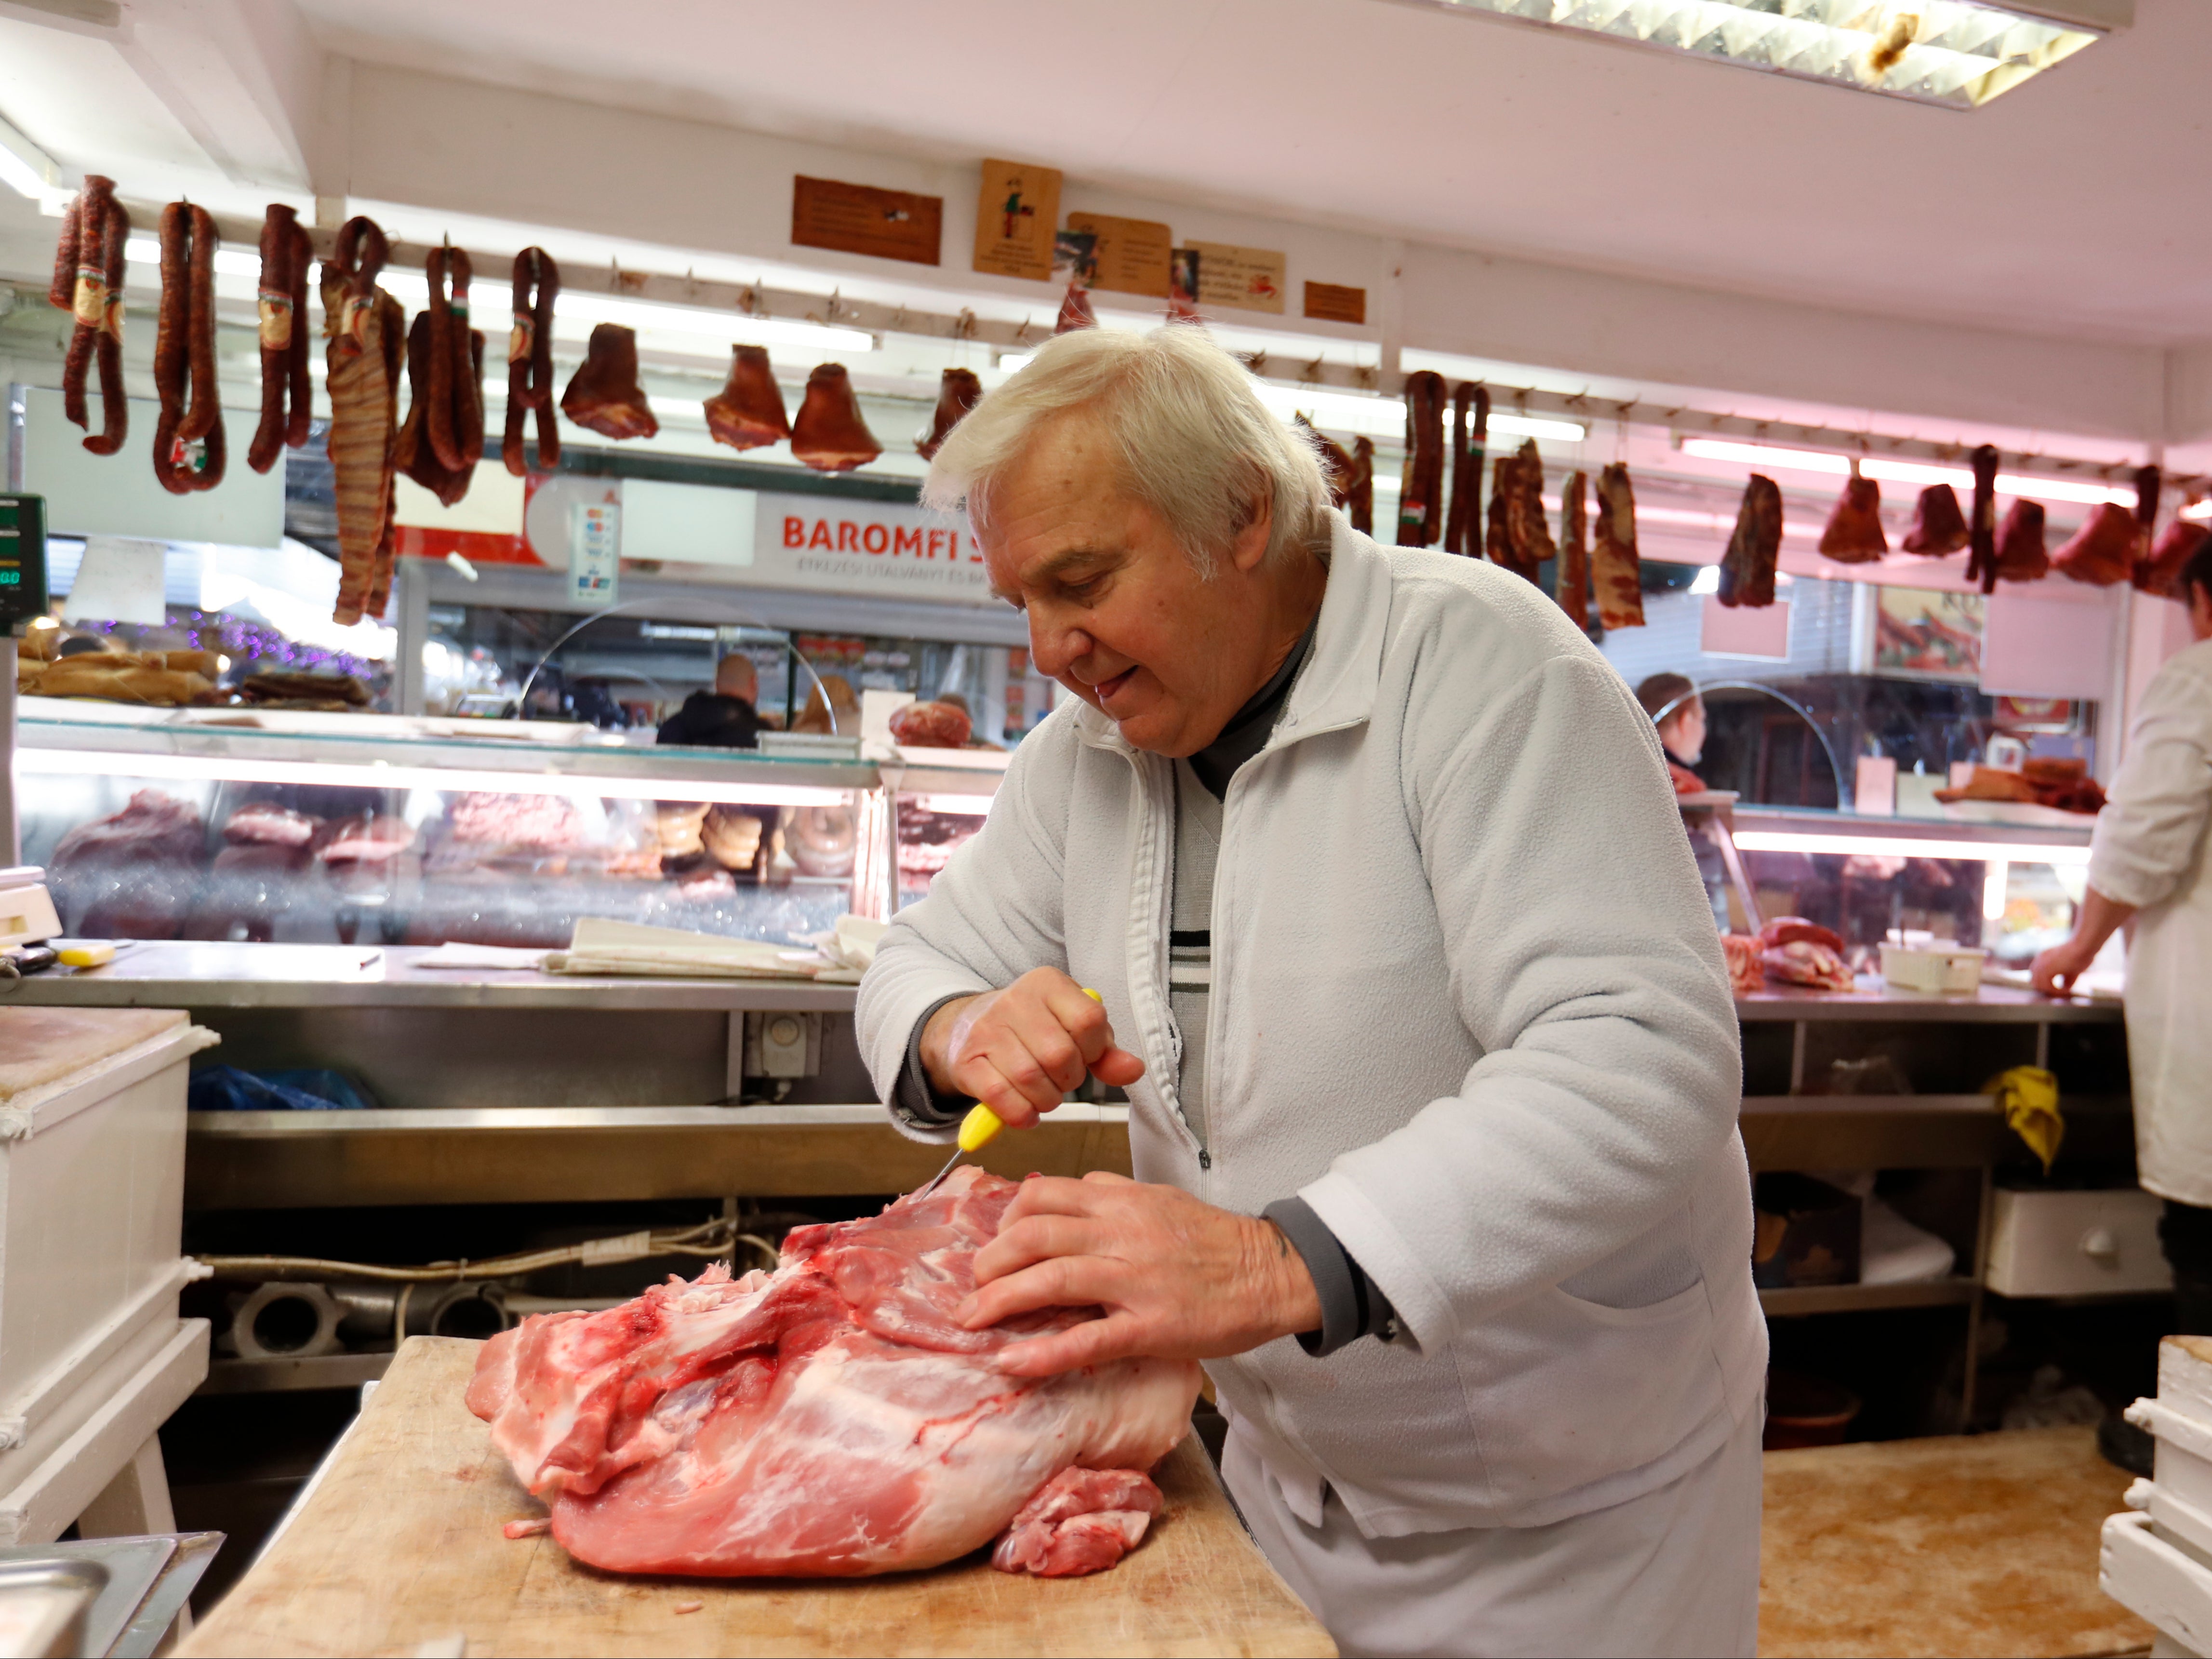 Vendor Misi Kovacs prepers the meat to sell, in a food market in Budapest, Hungary